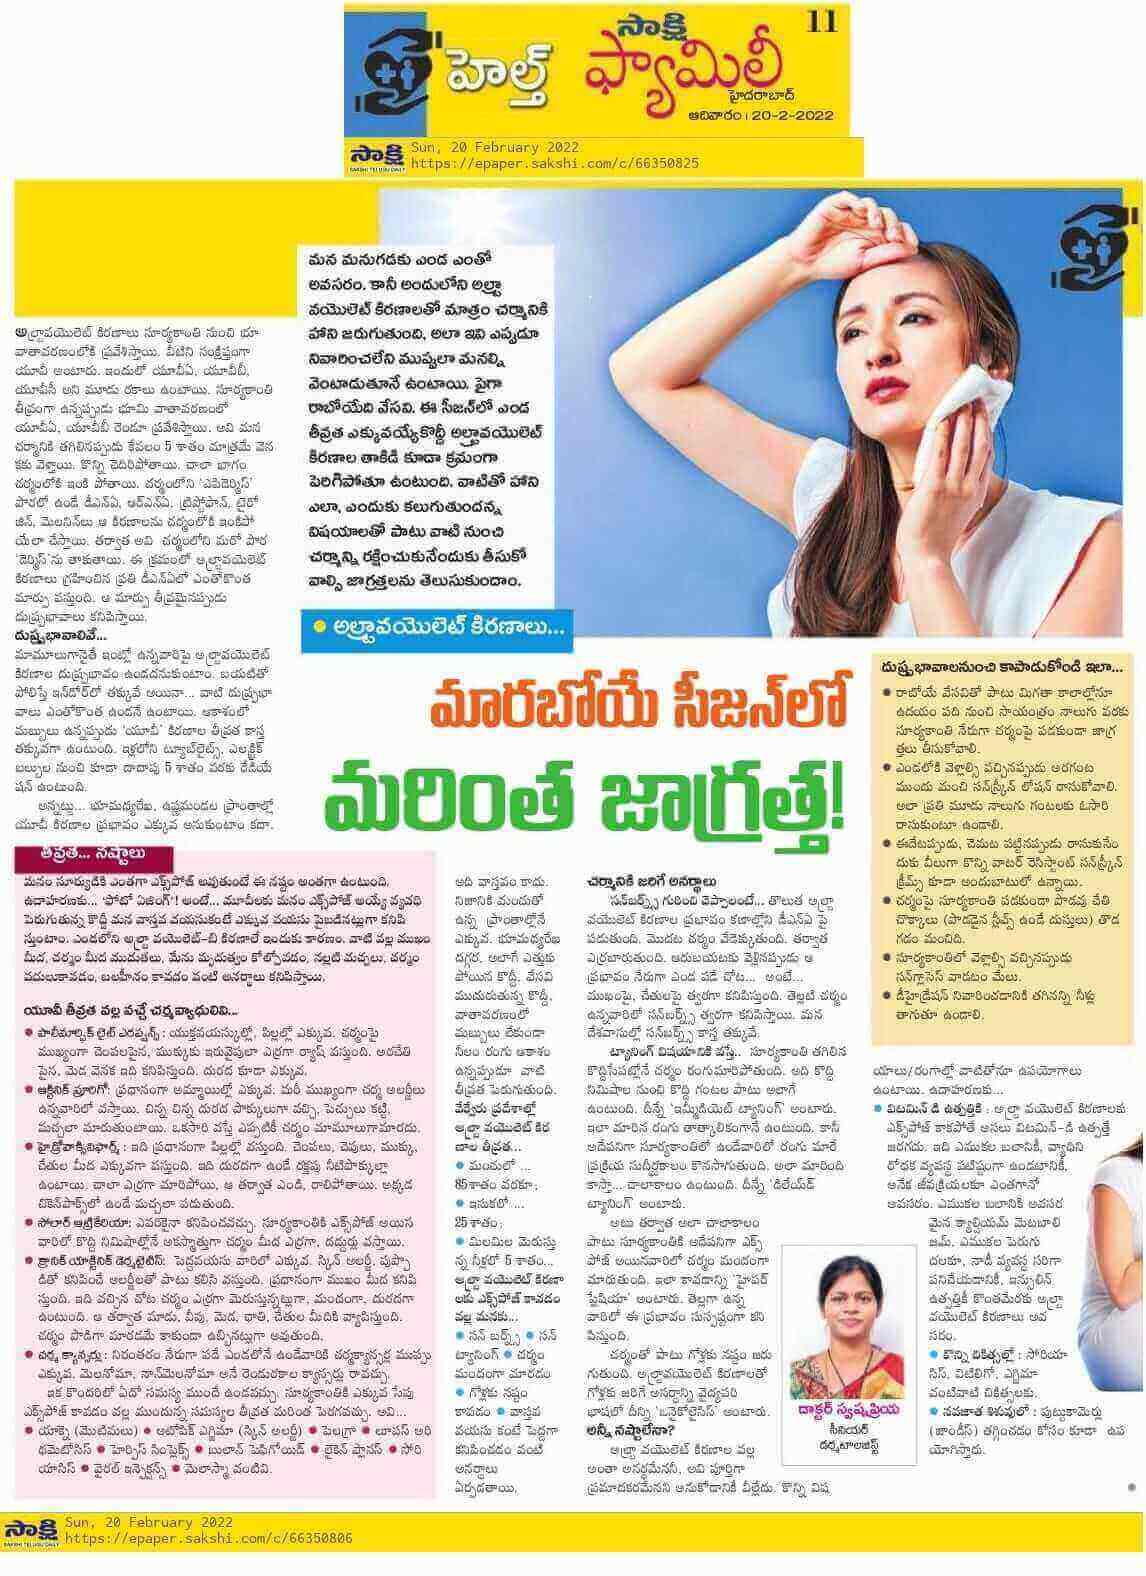 Article on Skin Care with Ultraviolet rays by Dr. Swapna Priya - Consultant Dermatologist